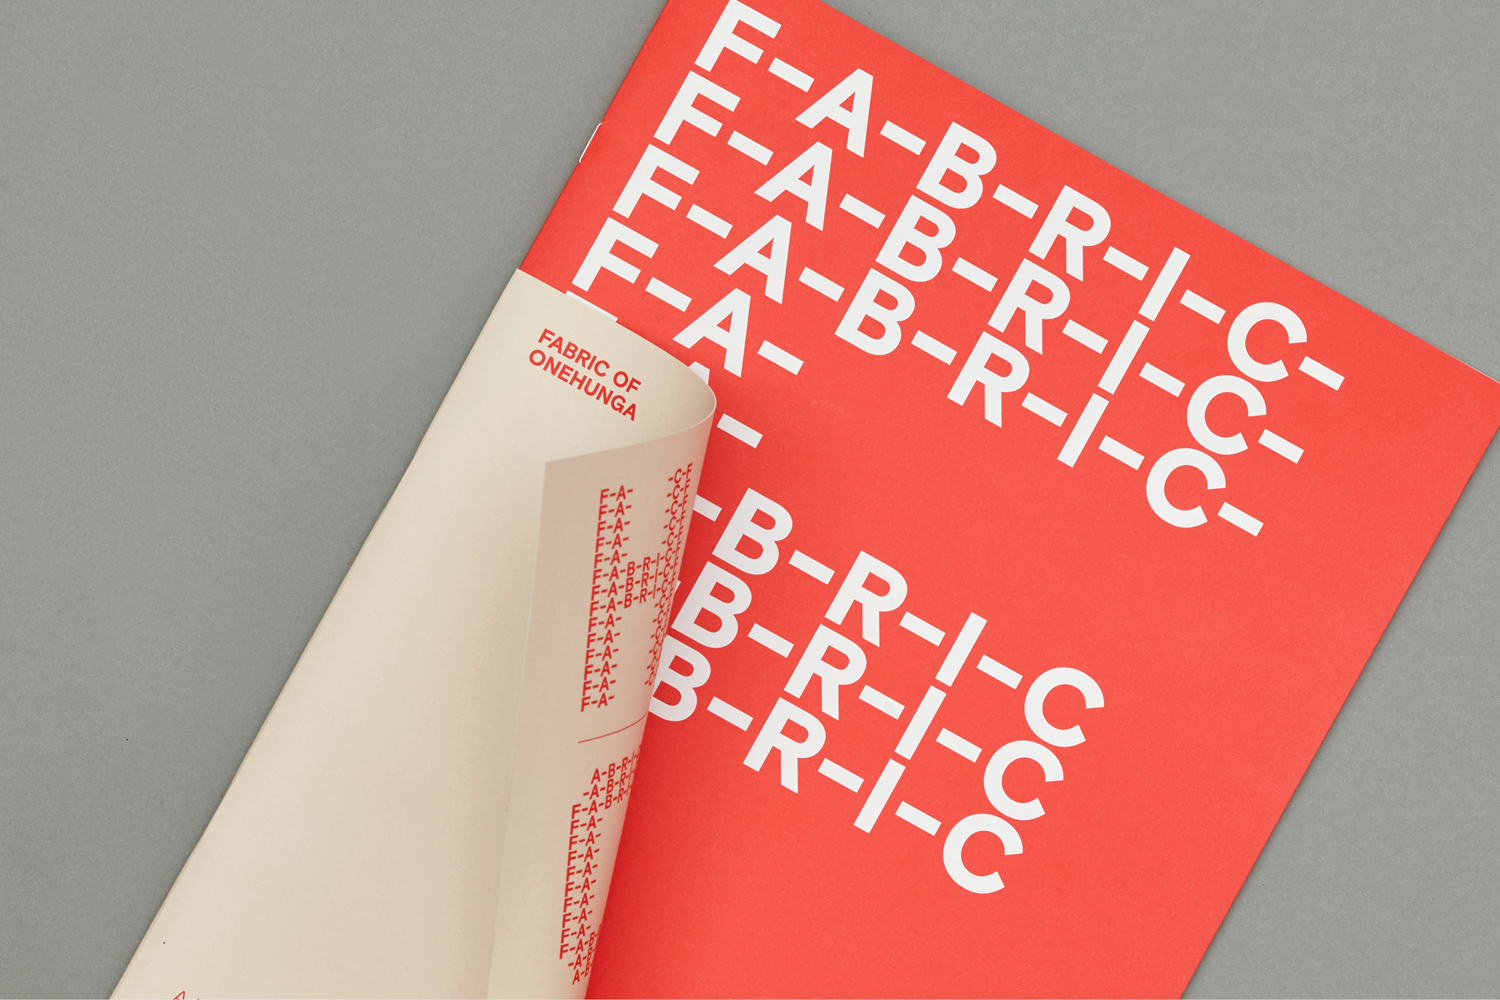 Type Play – Fabric of Onehunga by Richards Partners